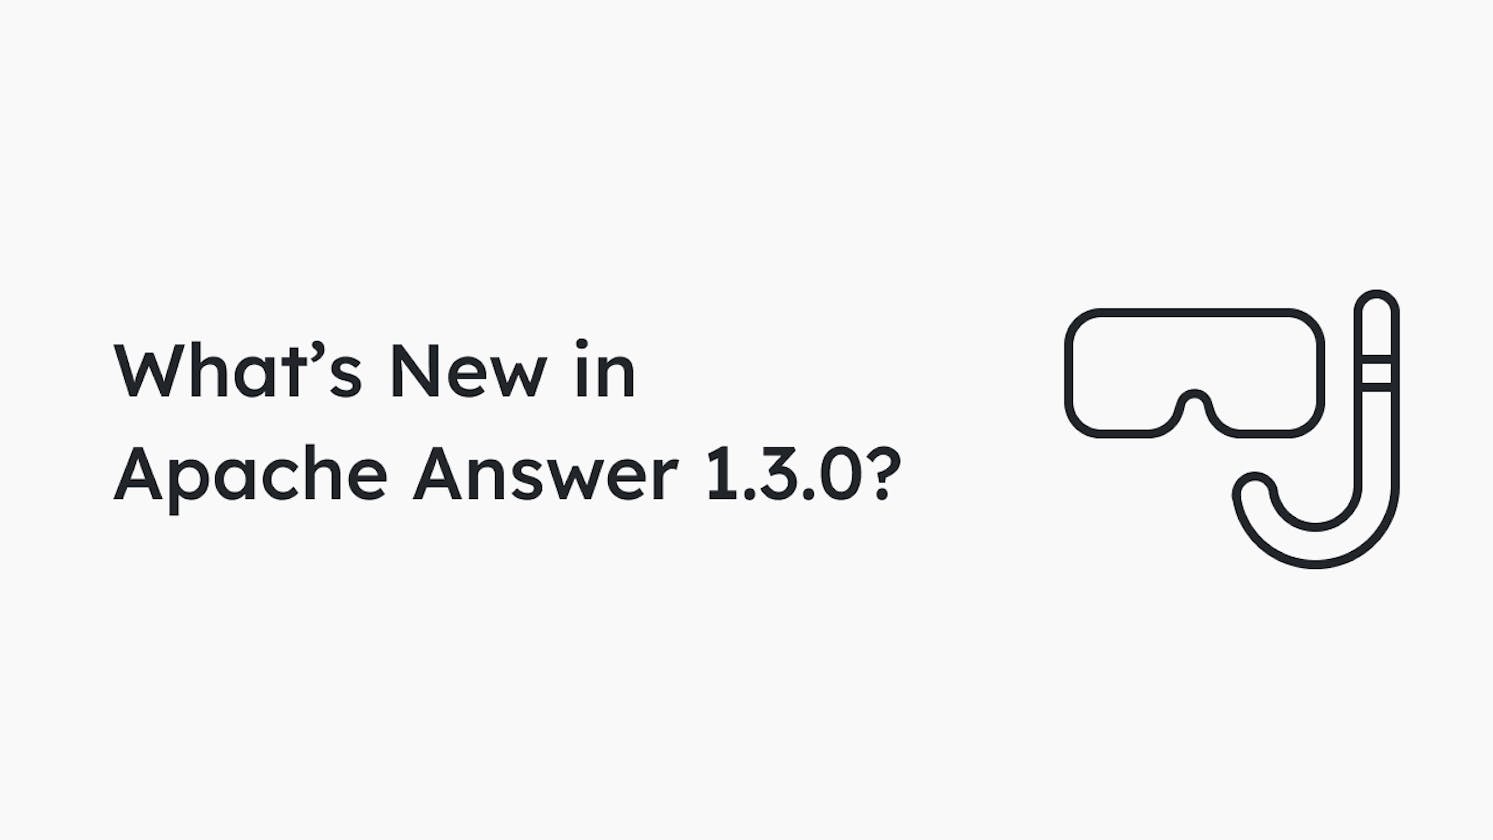 What’s New in Apache Answer 1.3.0?